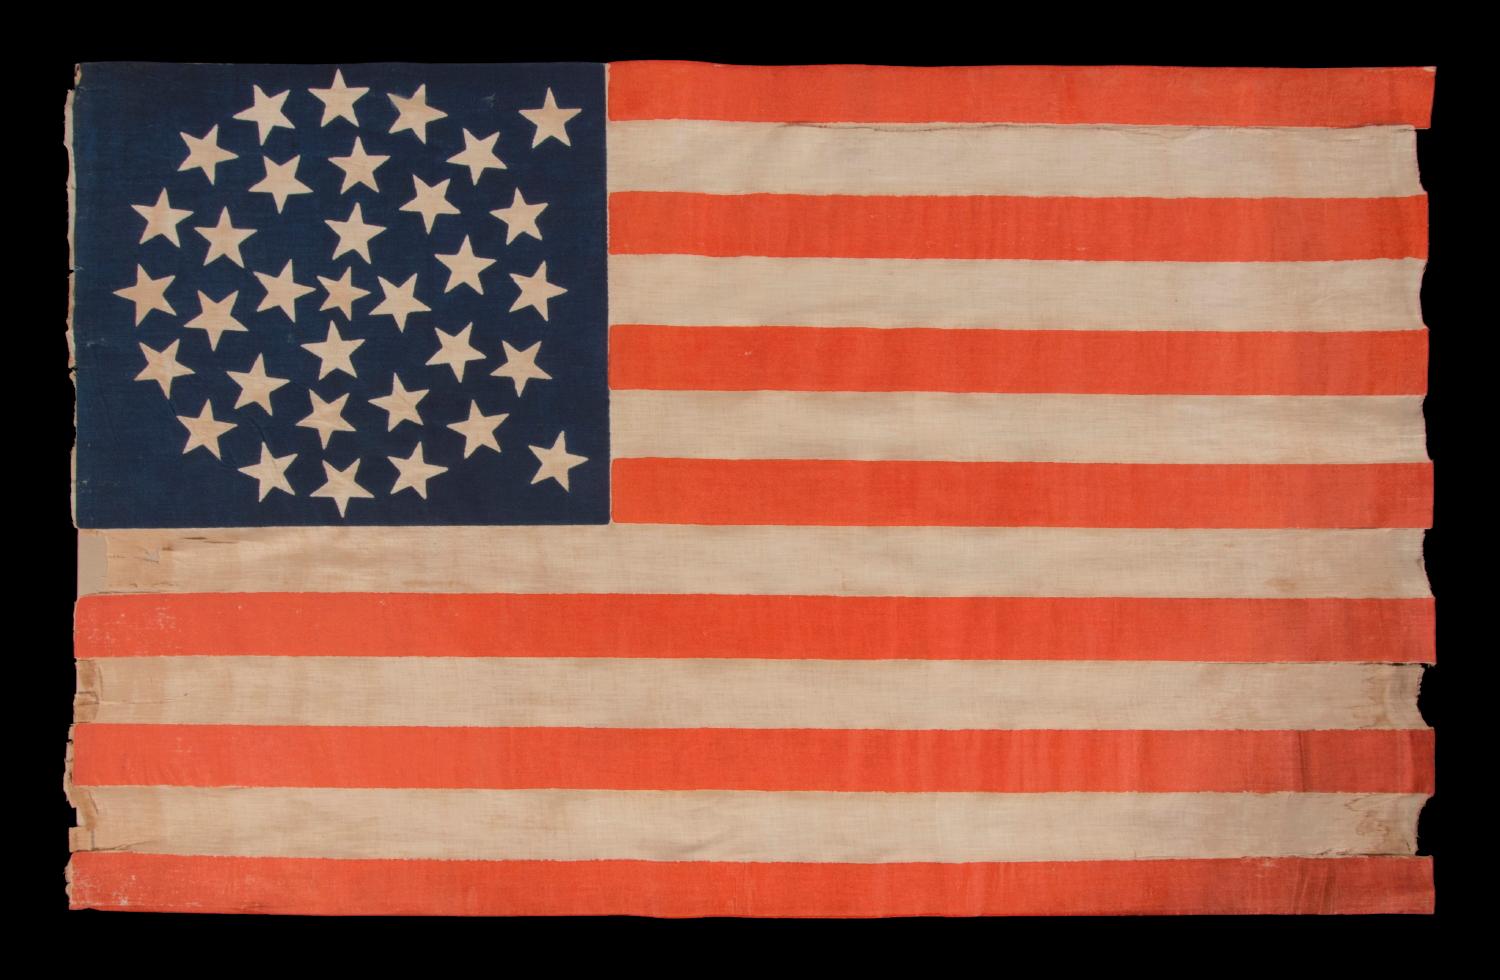 33 STARS IN A MEDALLION CONFIGURATION ON A LARGE SCALE PARADE FLAG, AN EXTREMELY RARE EXAMPLE, OREGON STATEHOOD, 1859-1861:

This 33 star American parade flag, printed on coarse, glazed cotton, is an especially large and visually attractive example